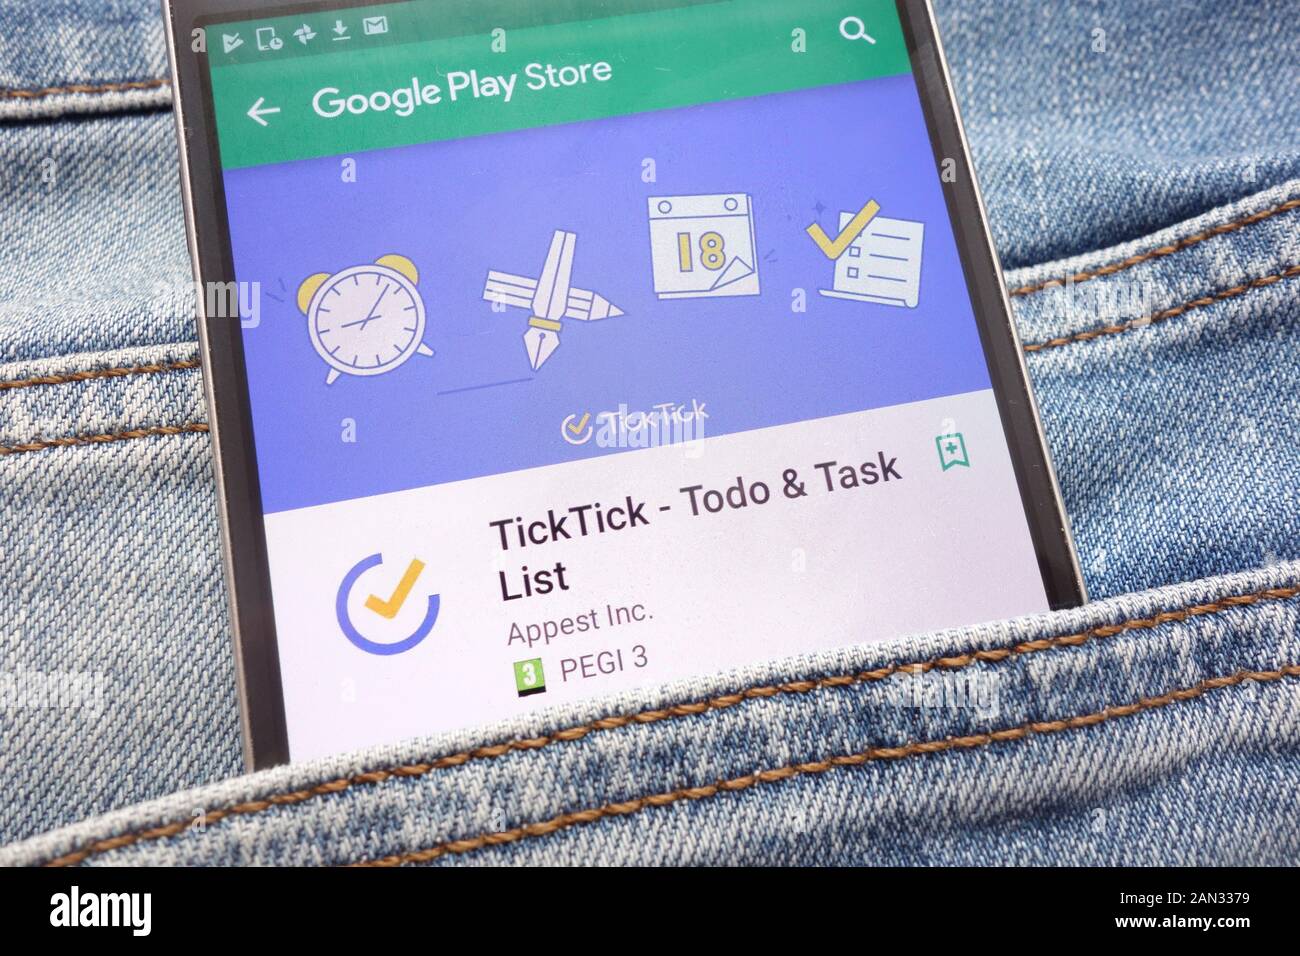 TickTick - Todo and Task List app on Google Play Store website displayed on smartphone hidden in jeans pocket Stock Photo